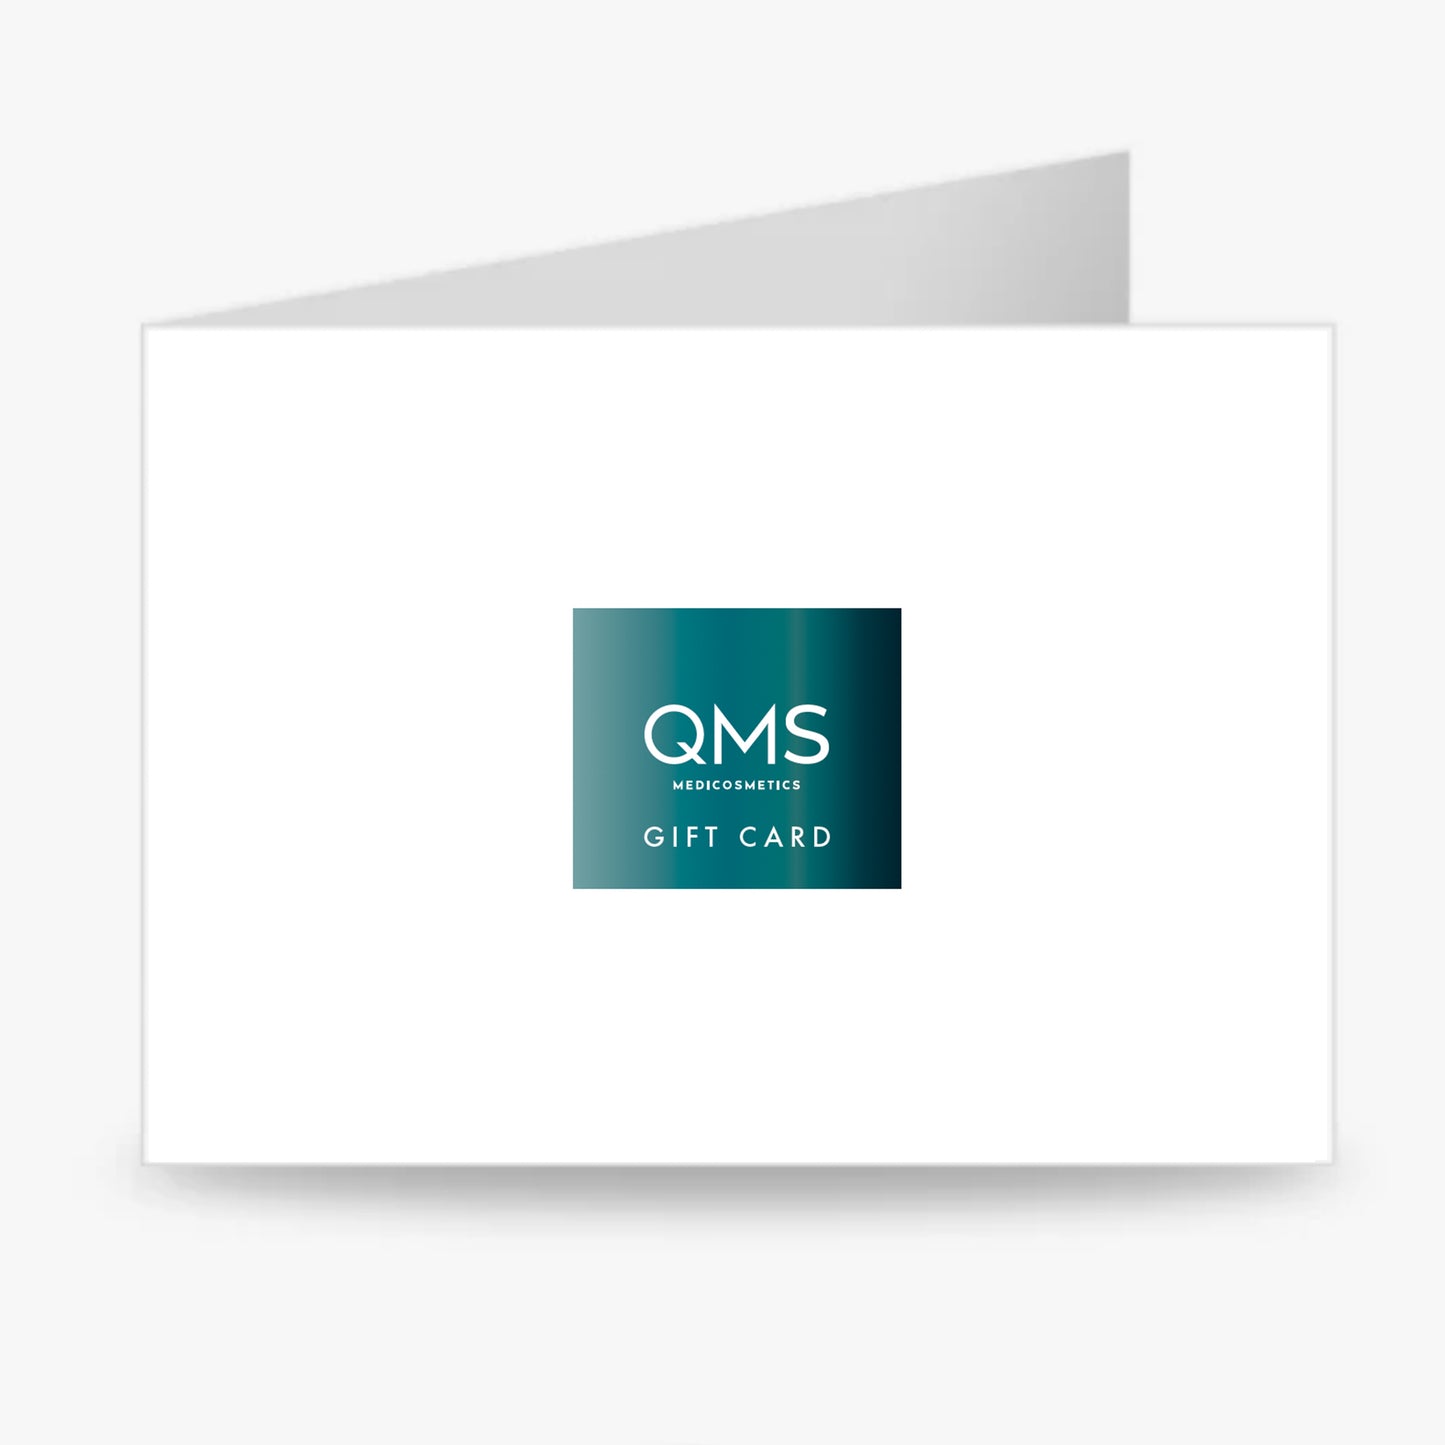 Gift Card "QMS"